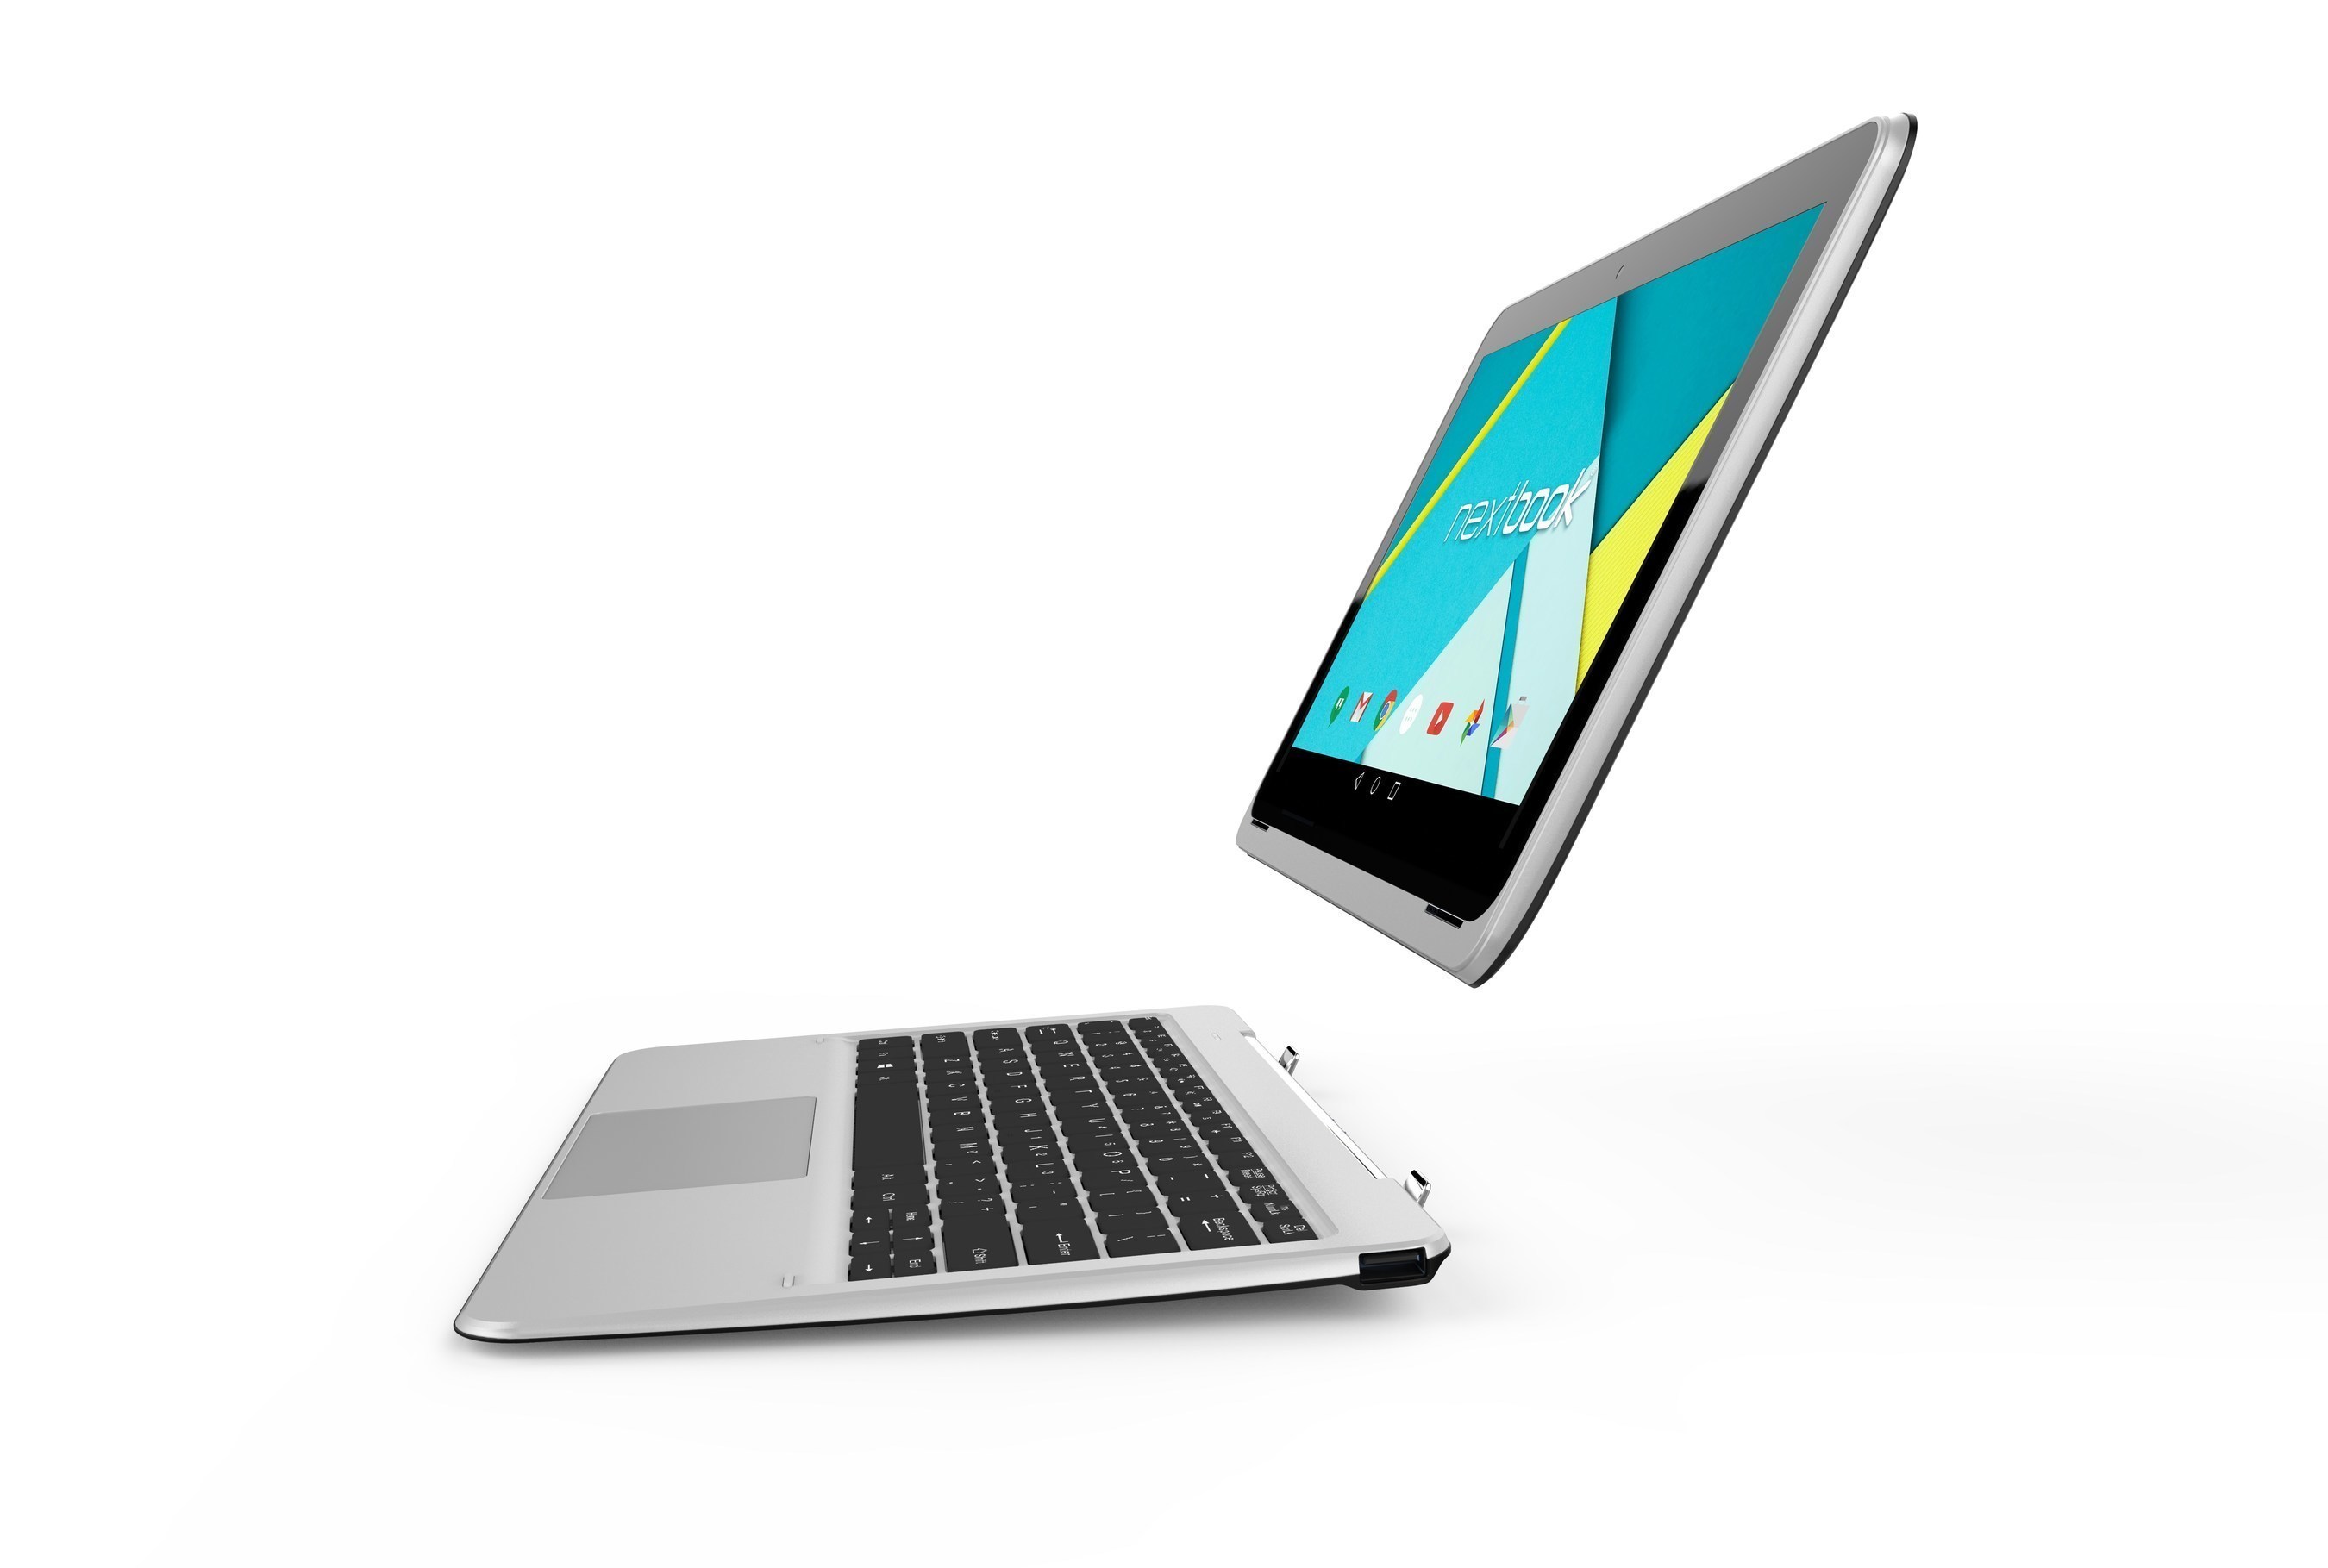 The Nextbook Ares 11A 2-in-1 Android tablet will debut at CES 2016